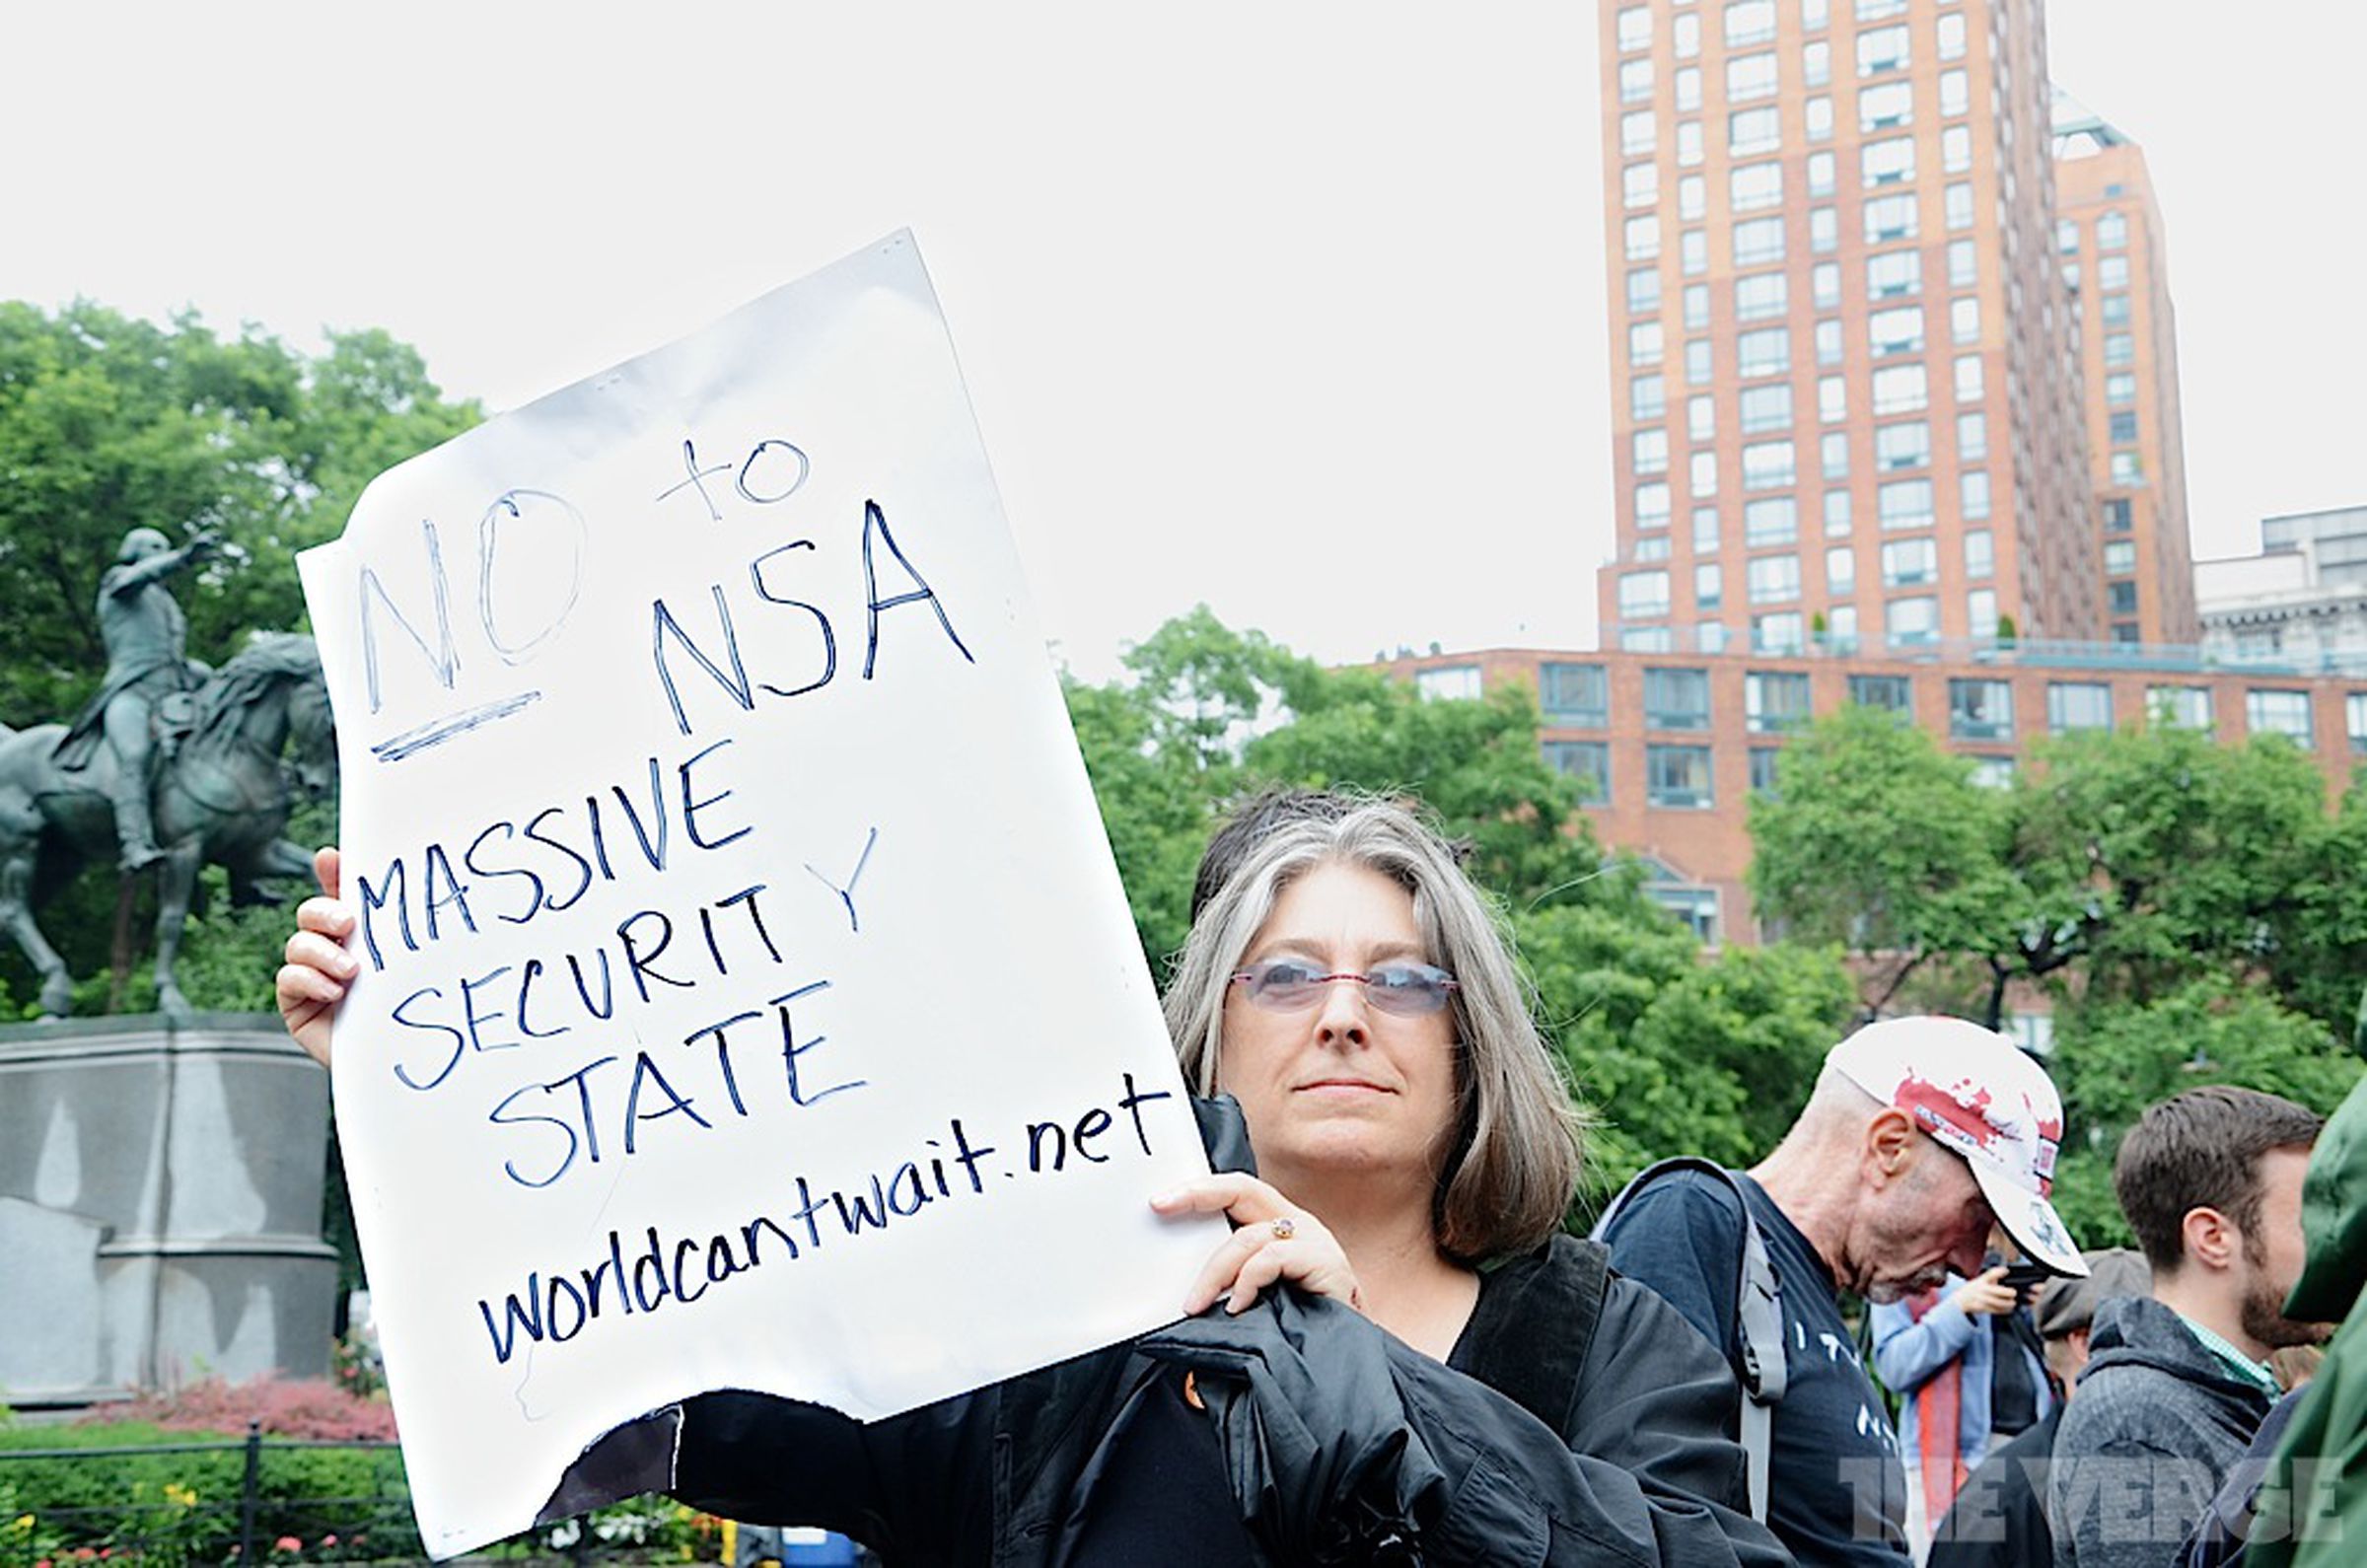 New Yorkers rally for Edward Snowden, NSA whistleblower